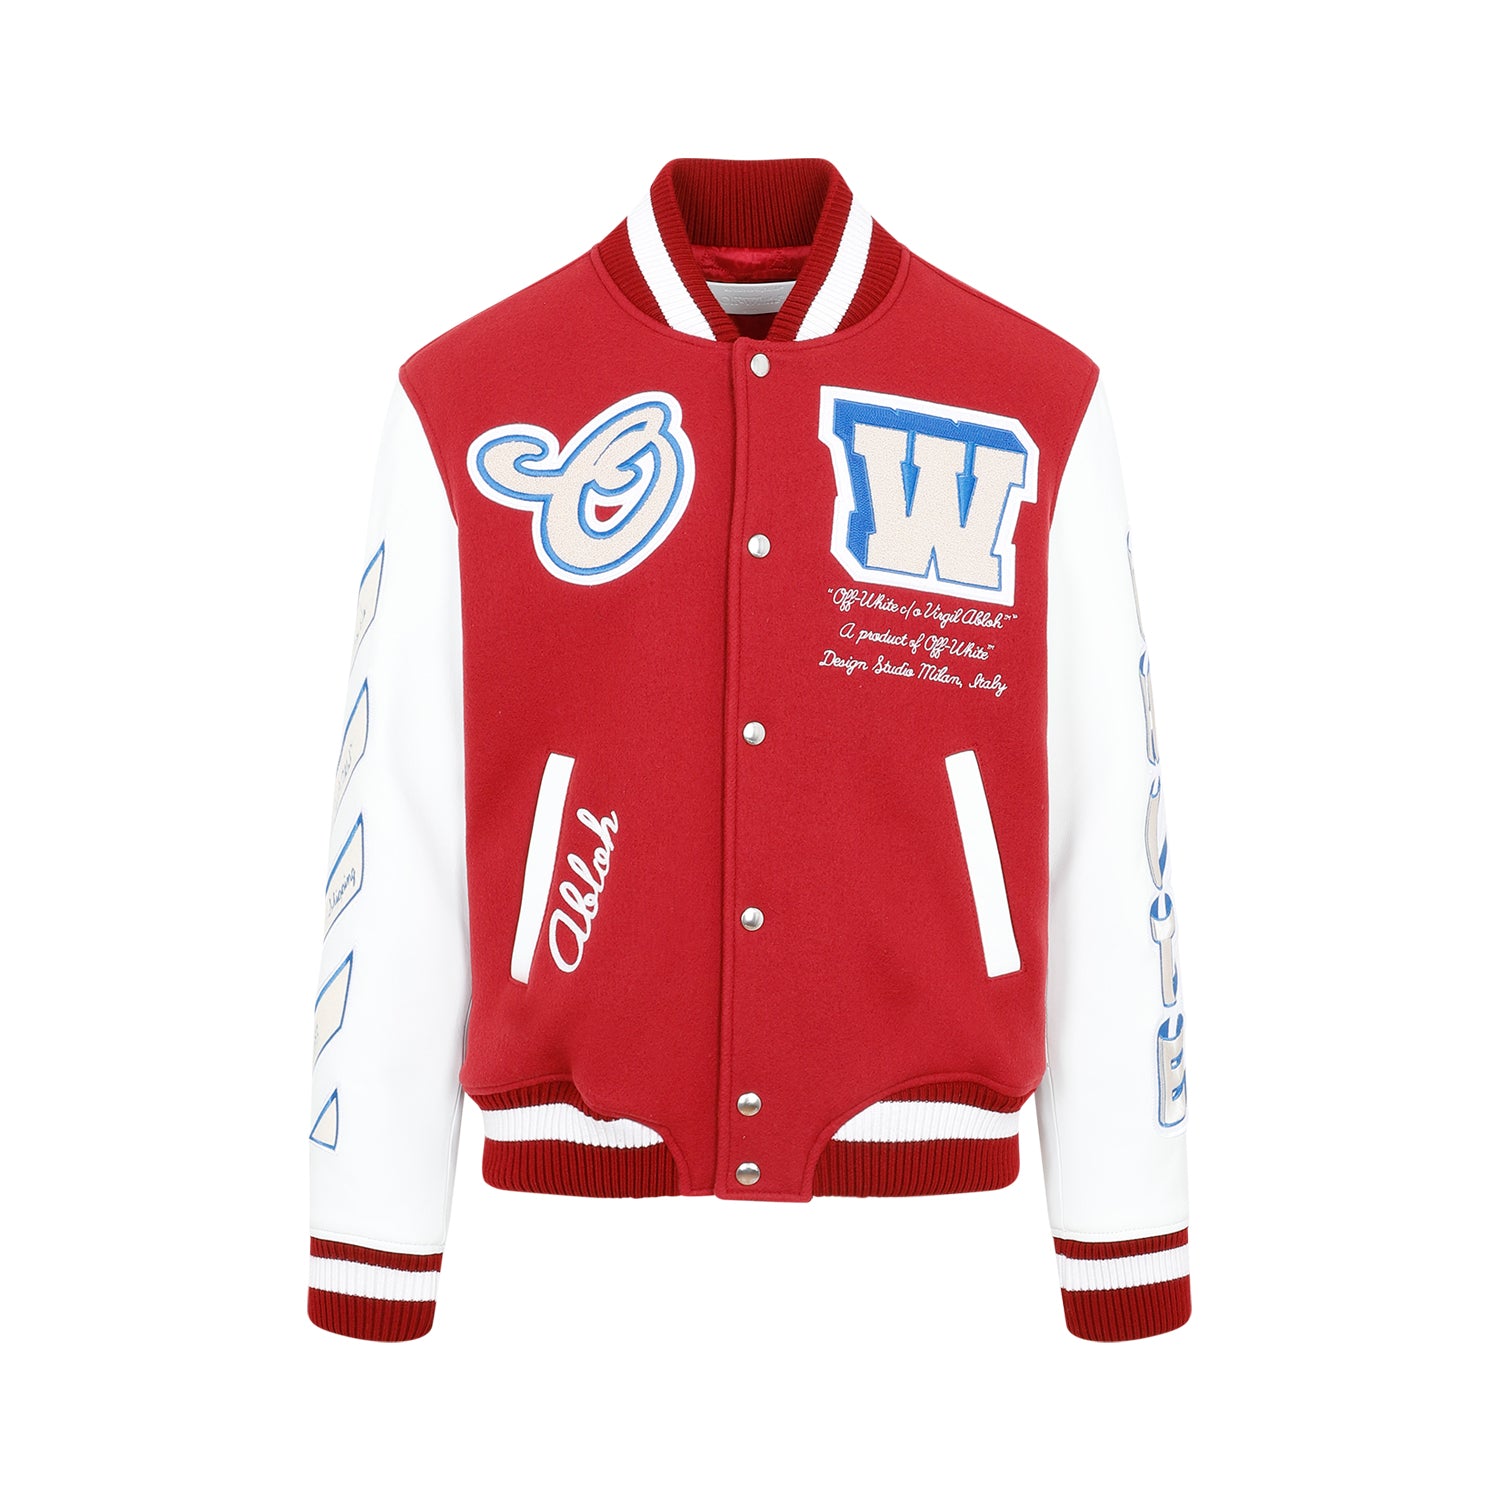 Off-White - Bomber jacket for Man - Red - OMJA122F23LEA001-2903